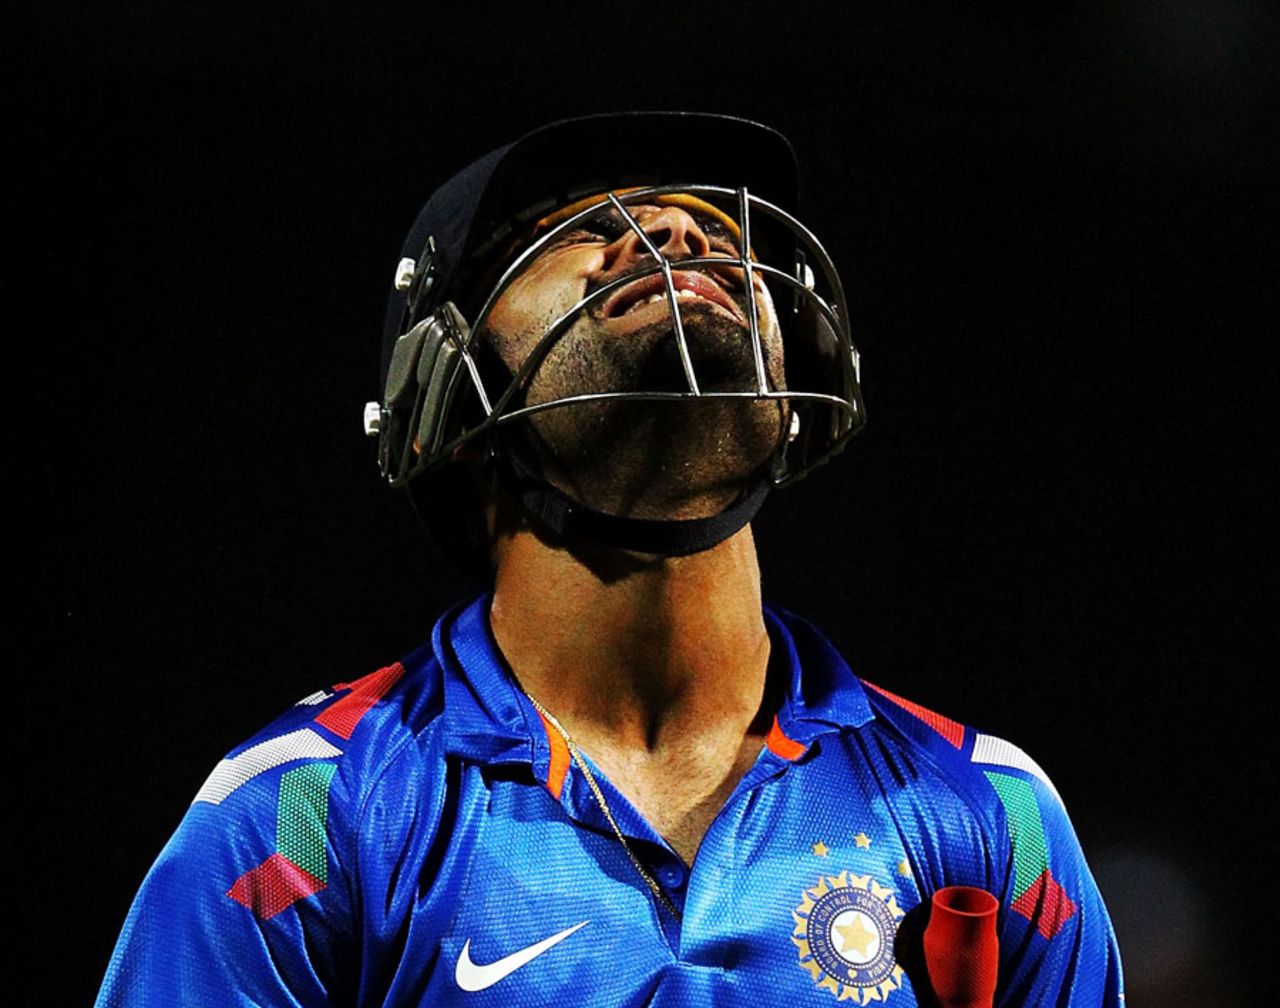 Virat Kohli is disappointed after being dismissed for 78, New Zealand v India, 2nd ODI, Hamilton, January 22, 2014